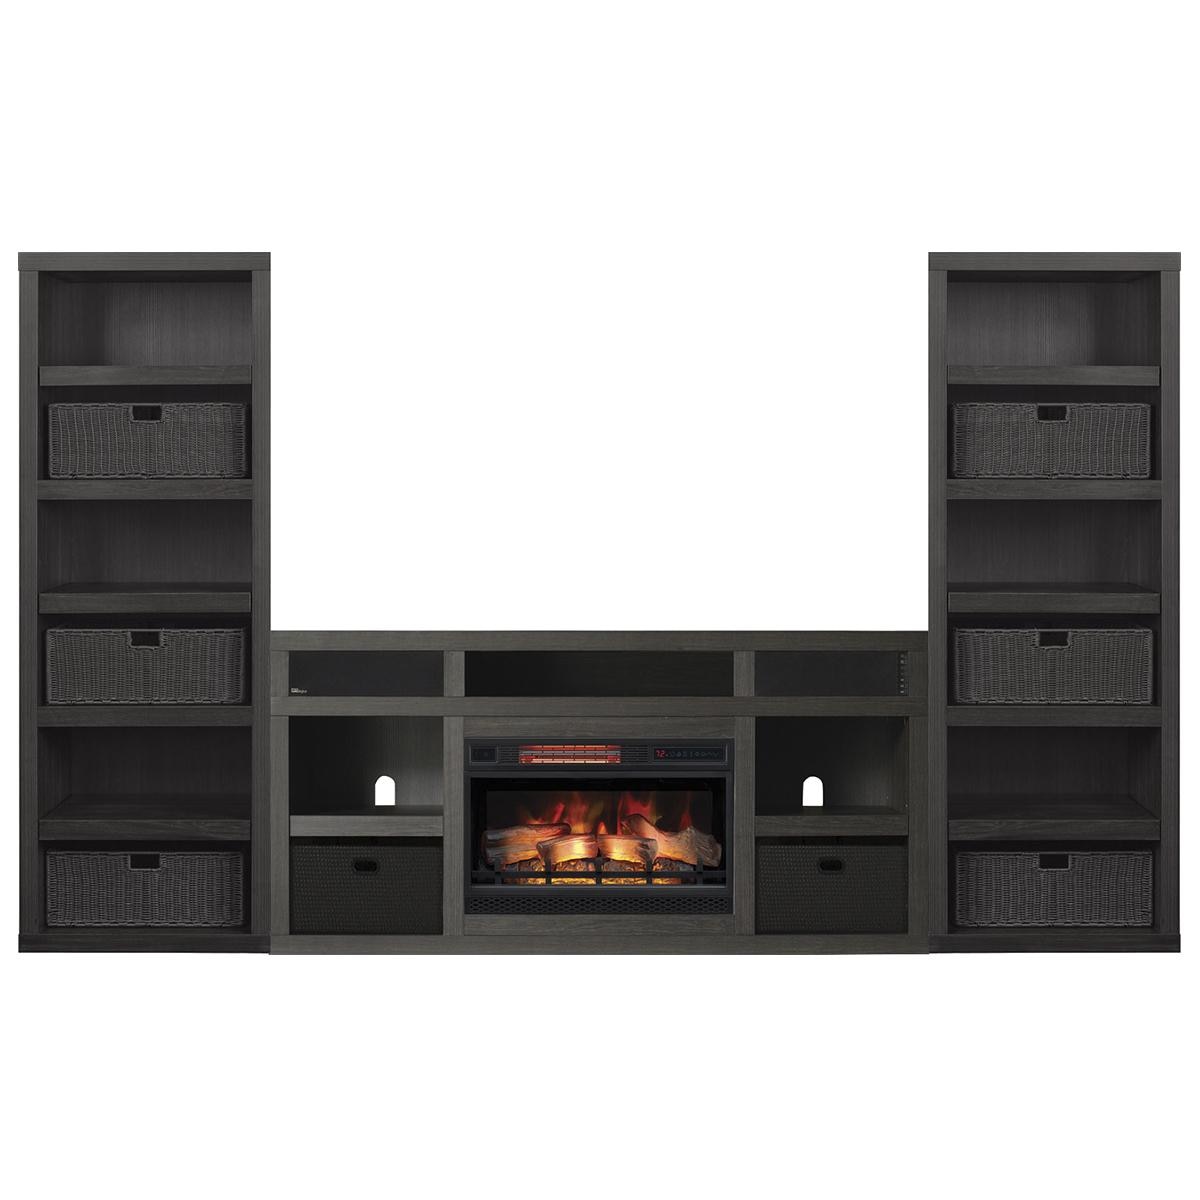 Large Mirror Over Fireplace Fresh Fabio Flames Greatlin 3 Piece Fireplace Entertainment Wall